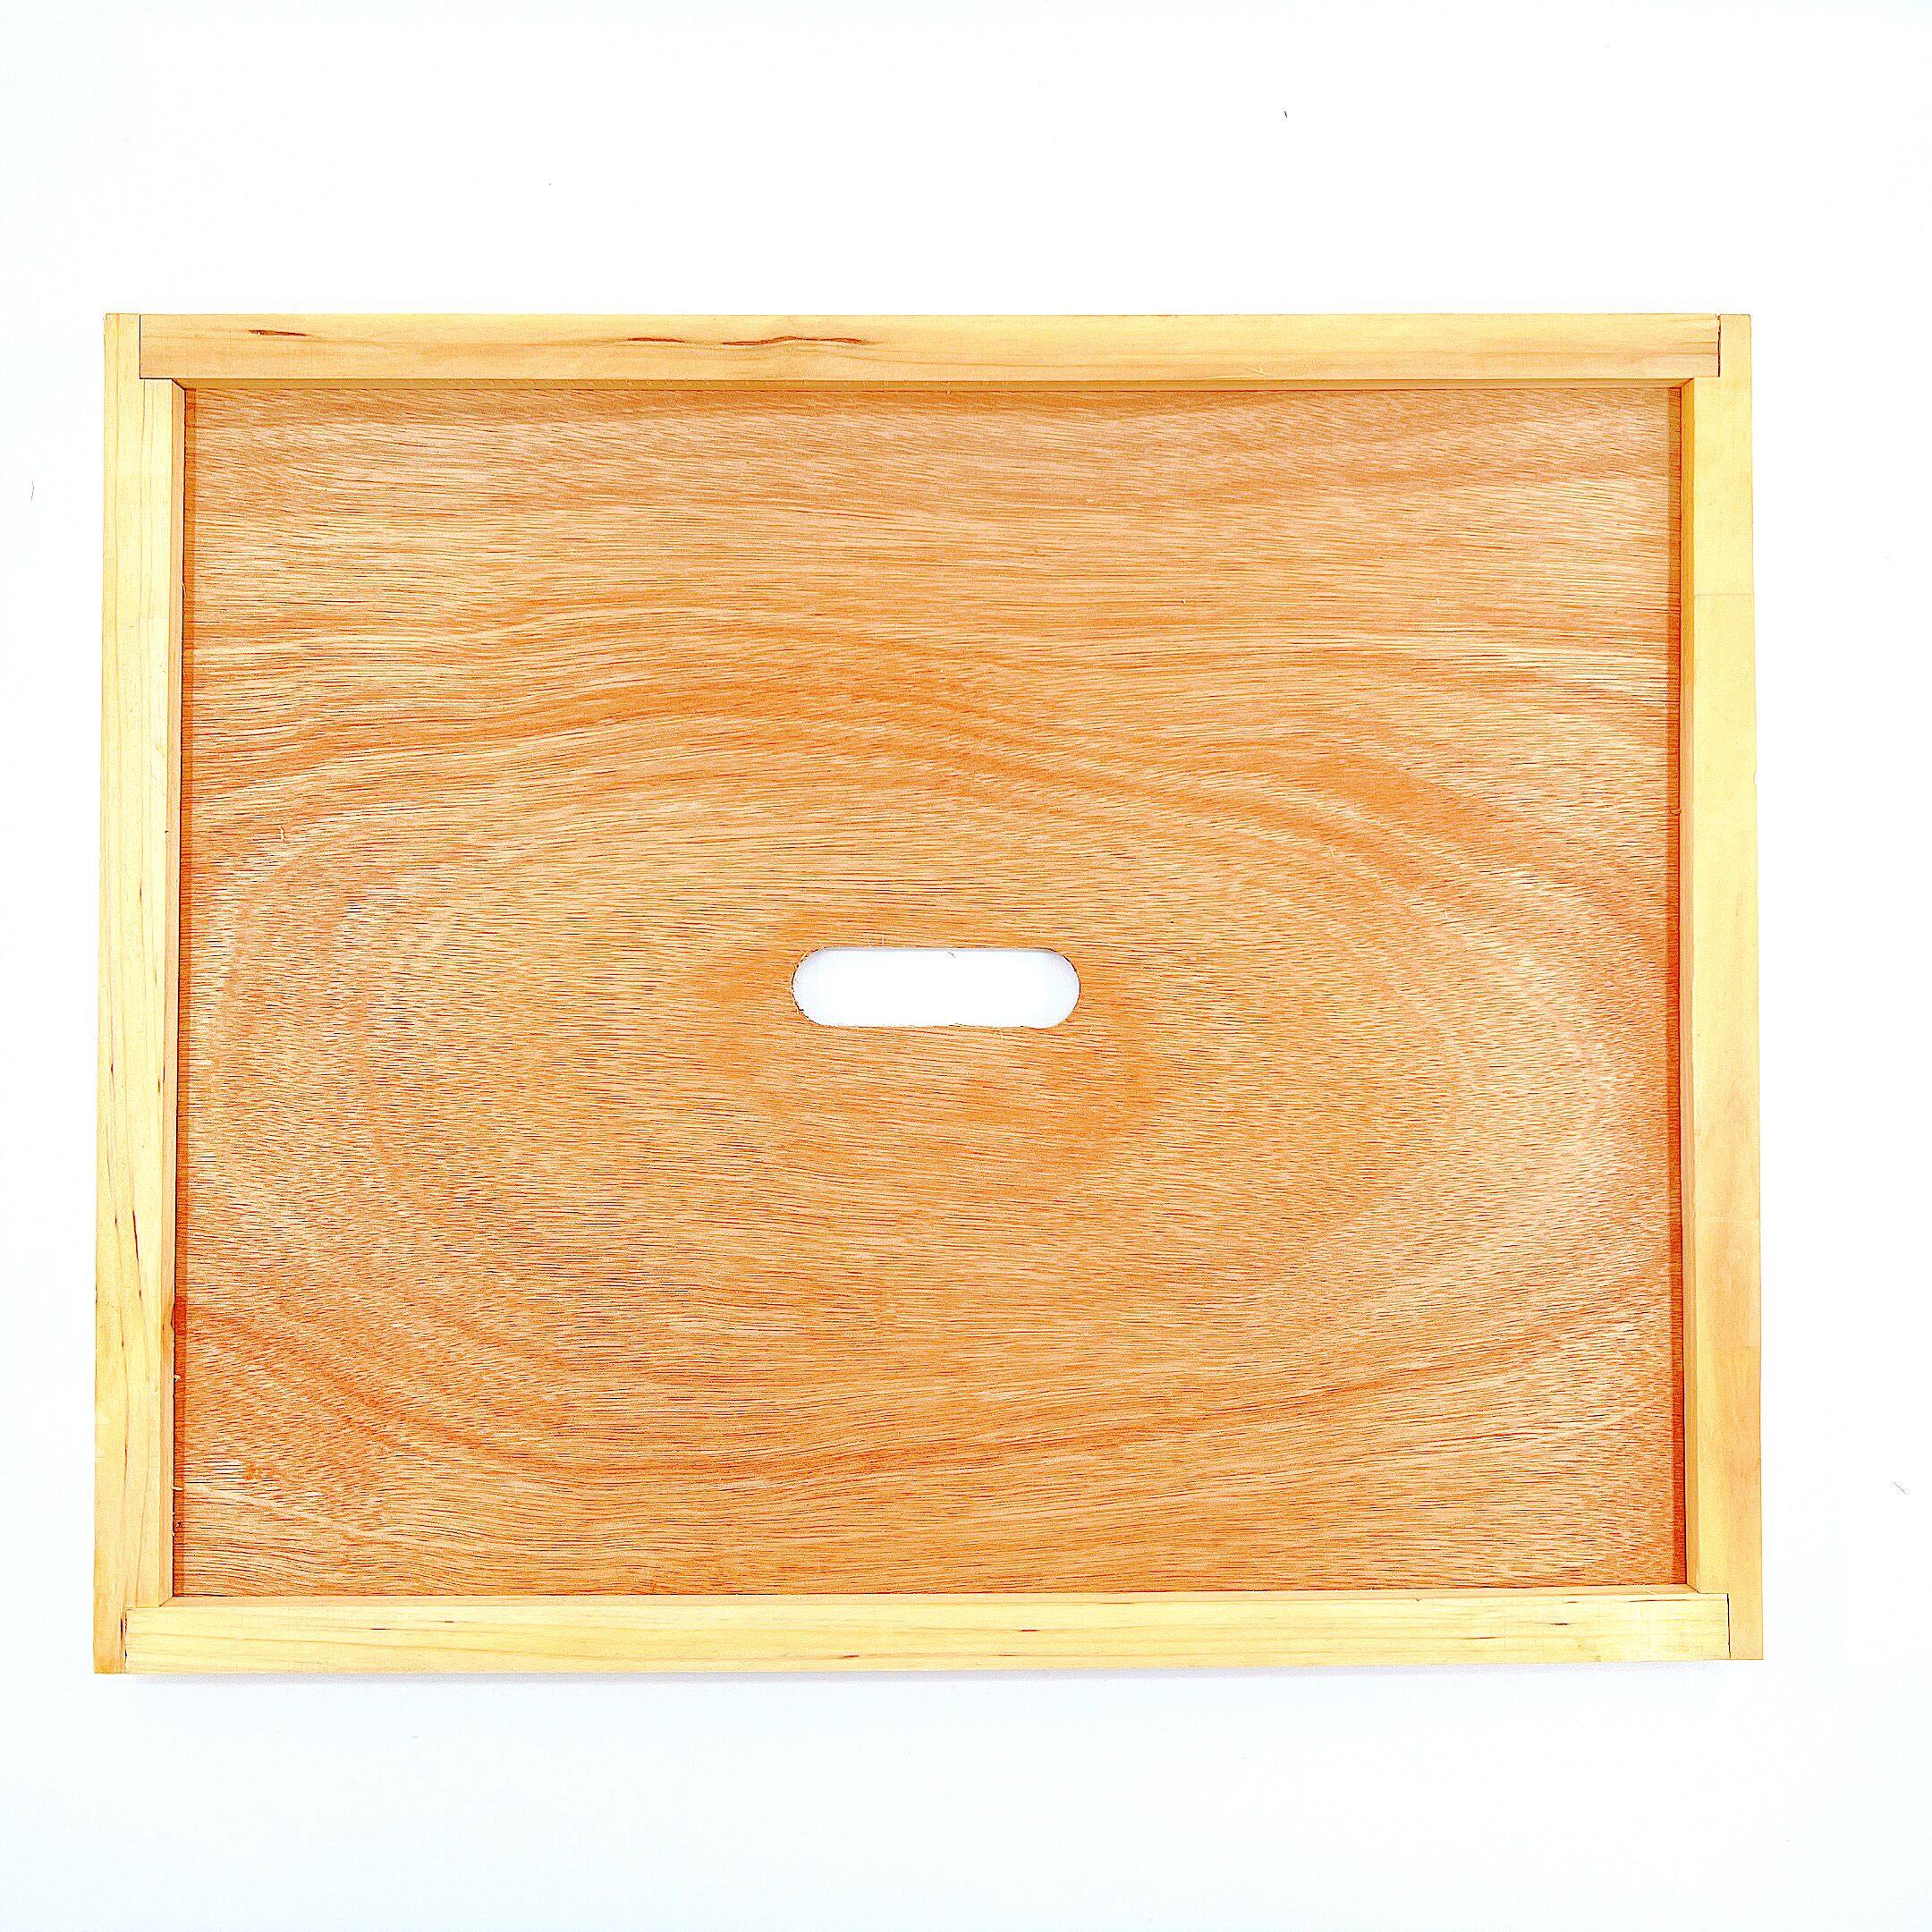 Langstroth beehive inner cover escape board beebox two layers for sale beehive box for beekeeping